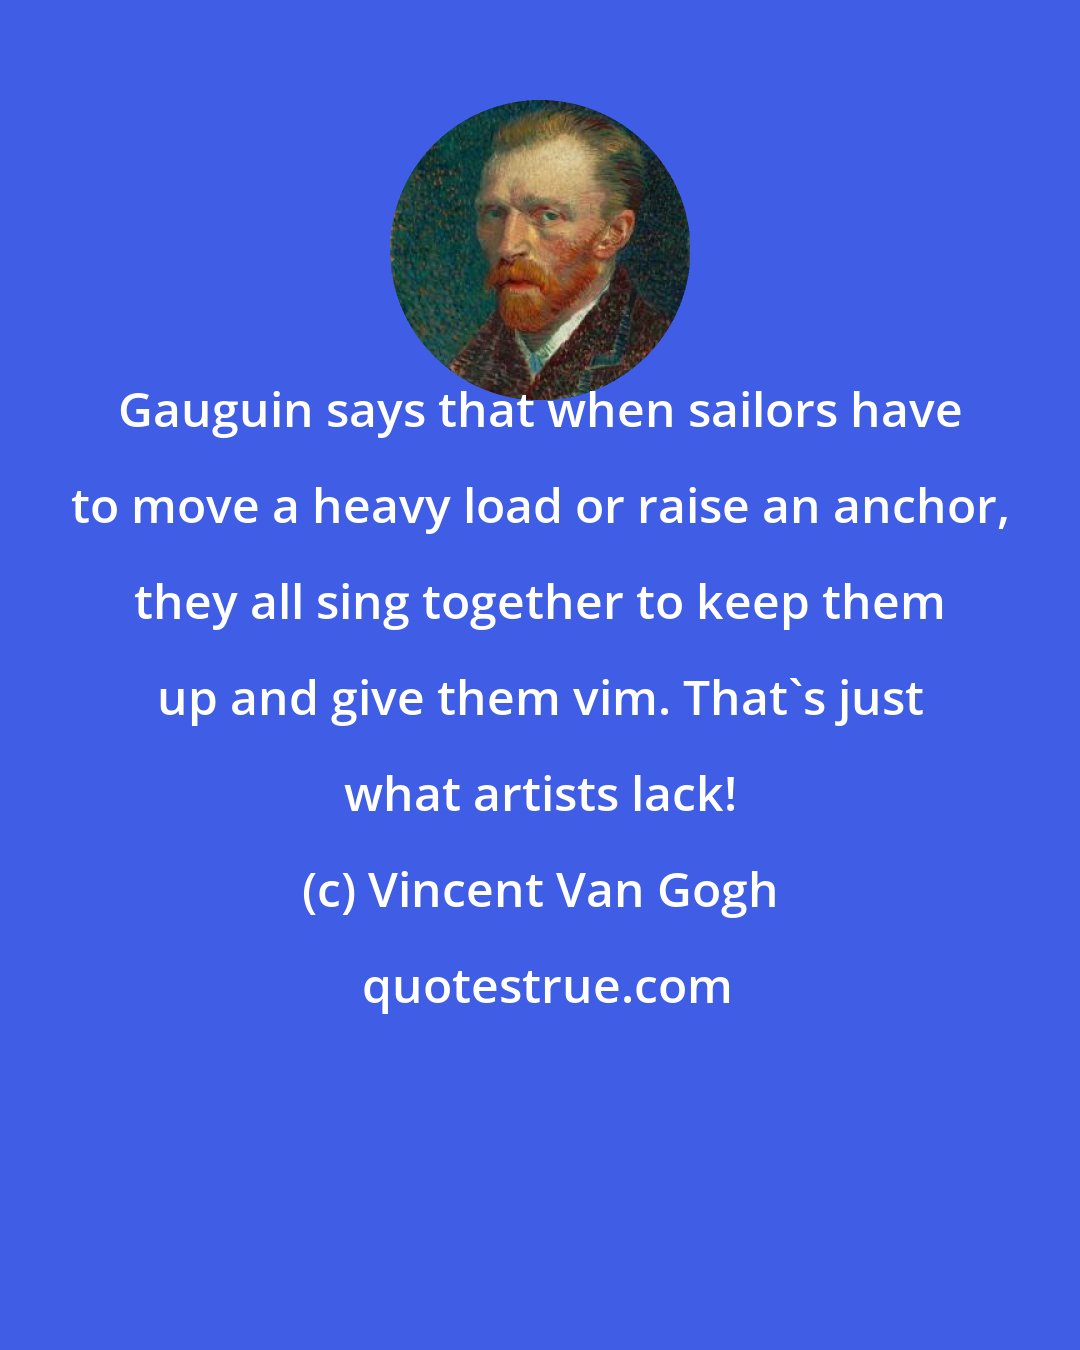 Vincent Van Gogh: Gauguin says that when sailors have to move a heavy load or raise an anchor, they all sing together to keep them up and give them vim. That's just what artists lack!